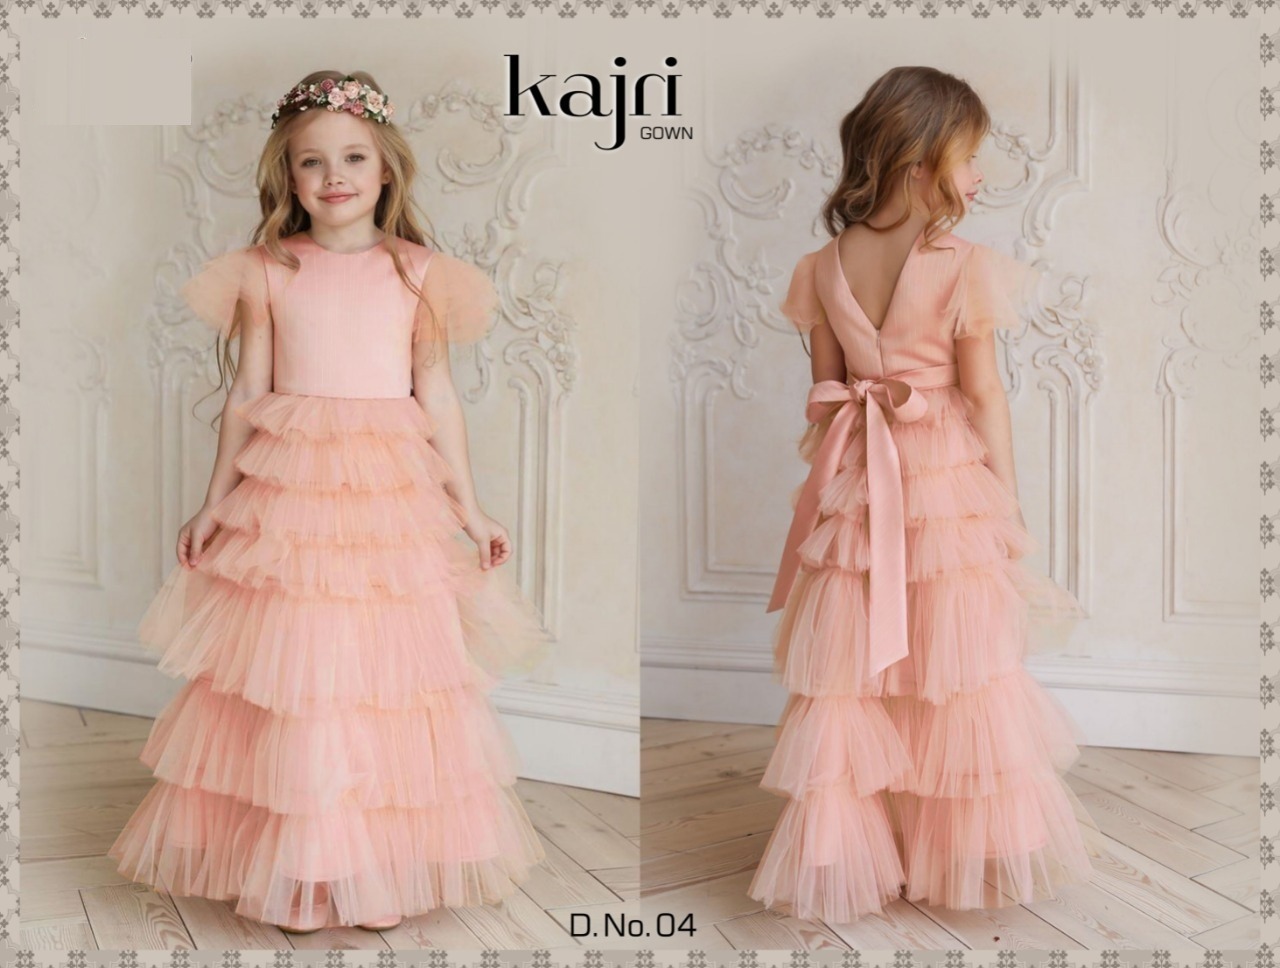 Girls Net Yarn Princess Dress With Puff Sleeves And TuTu Lace Fashionable  Ball Gown For Summer Boutique Baby Dresses 1790 B3 From Dp02, $27.23 |  DHgate.Com